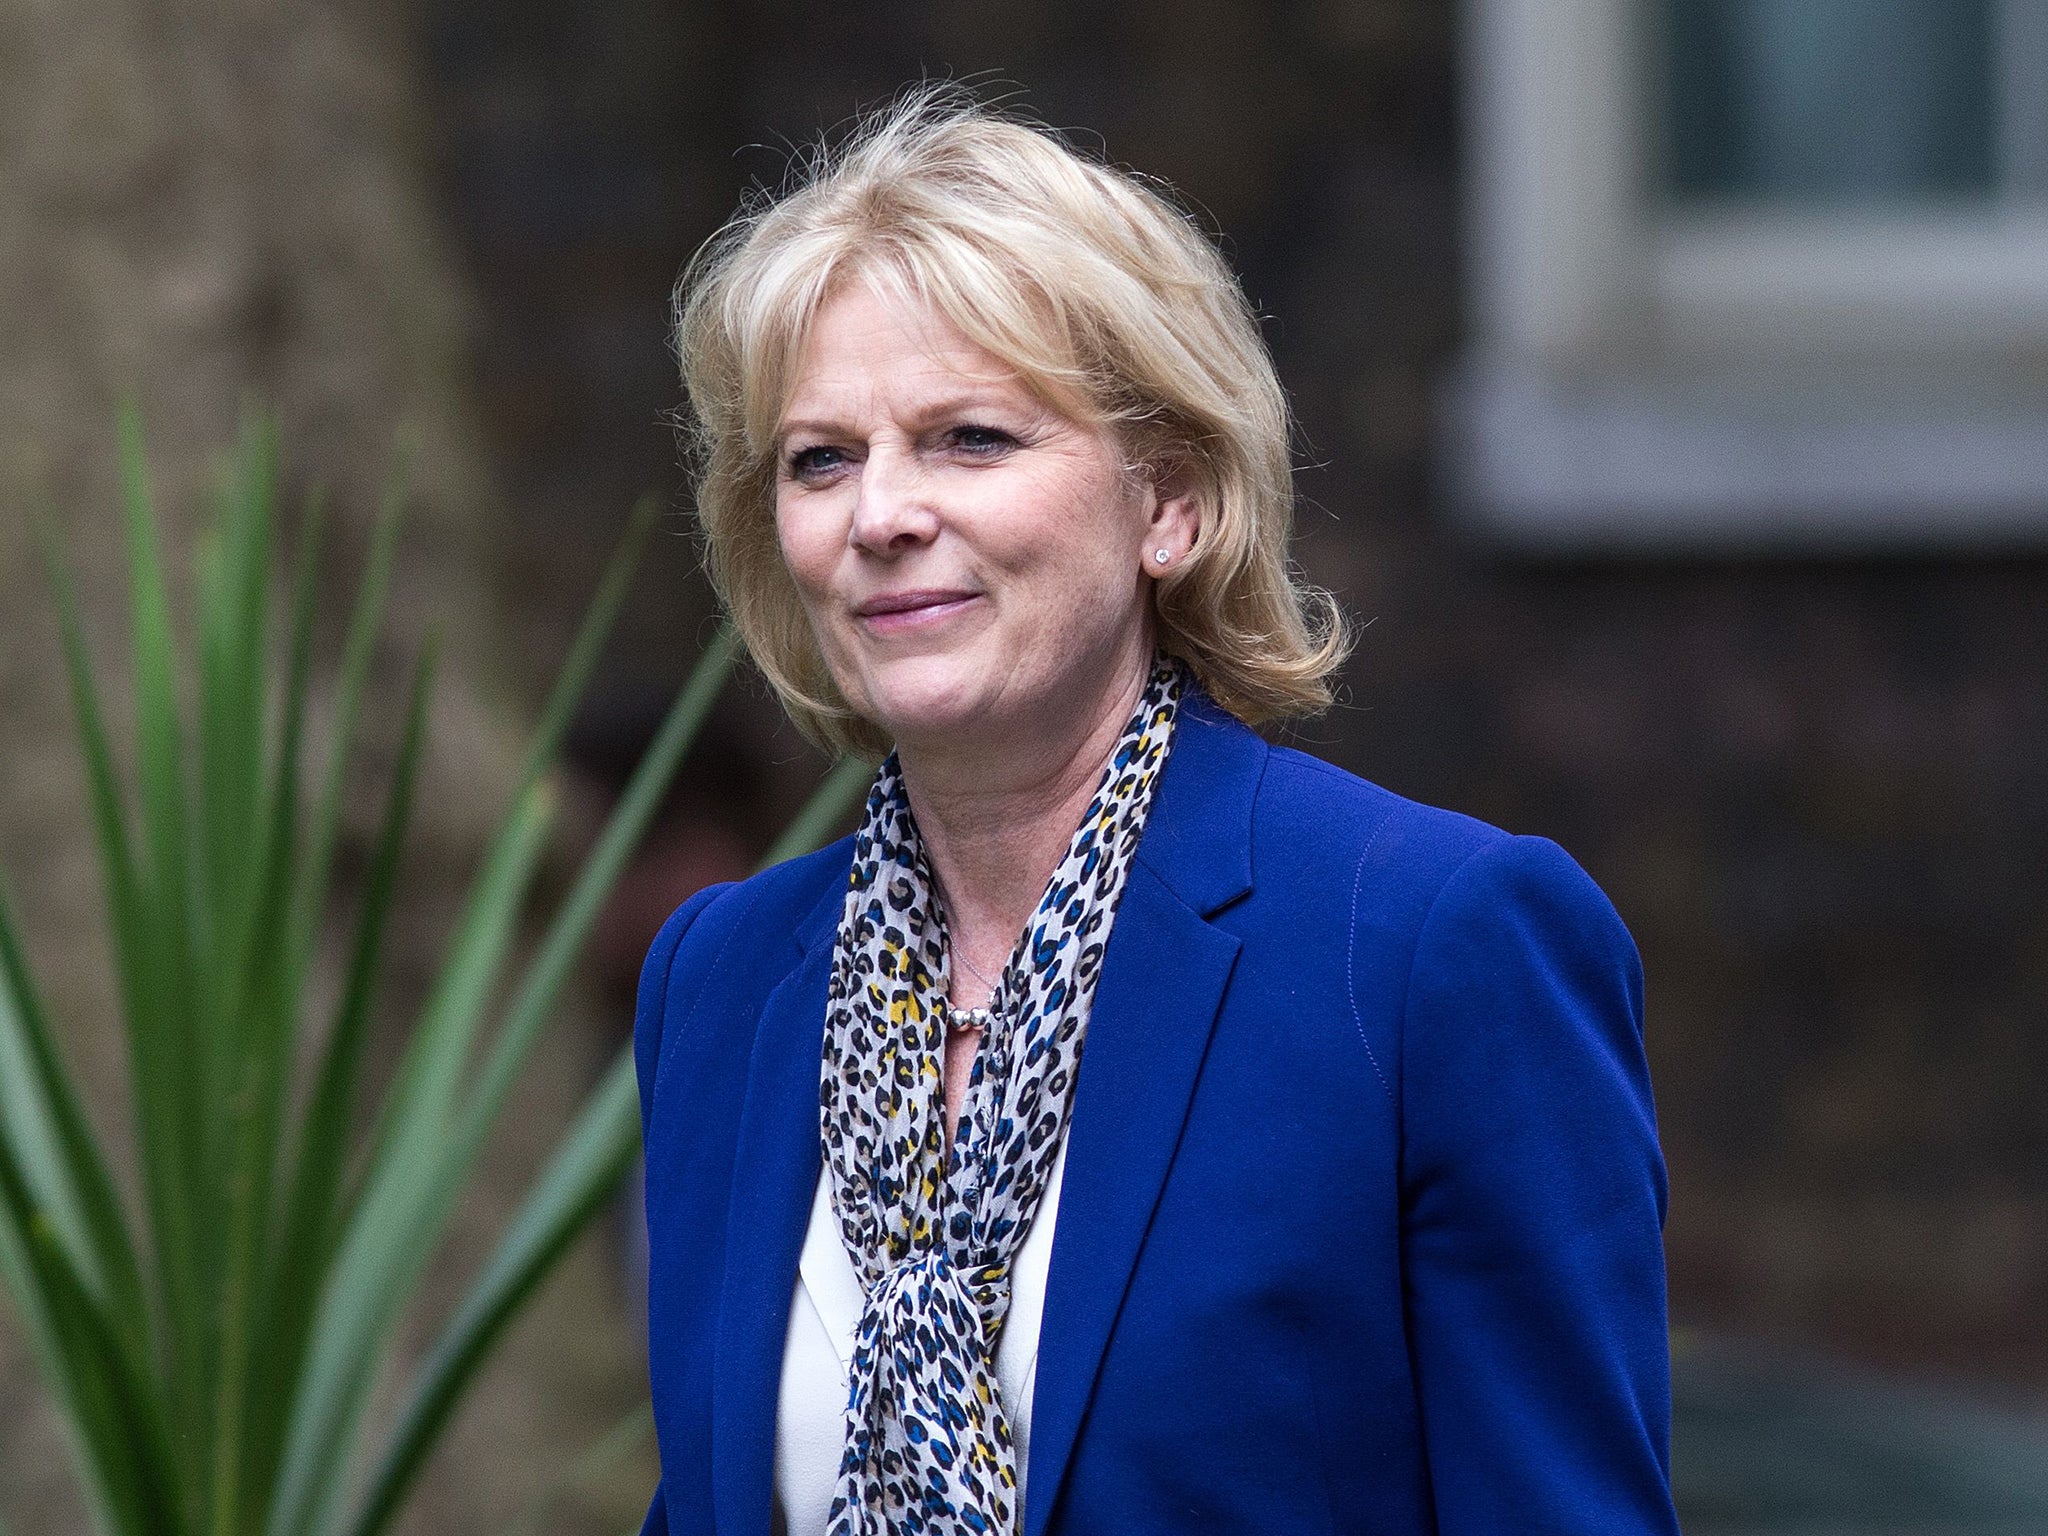 Anna Soubry: I am calling on the Government to Drop the Target and adopt an immigration policy based on what is best for our economy